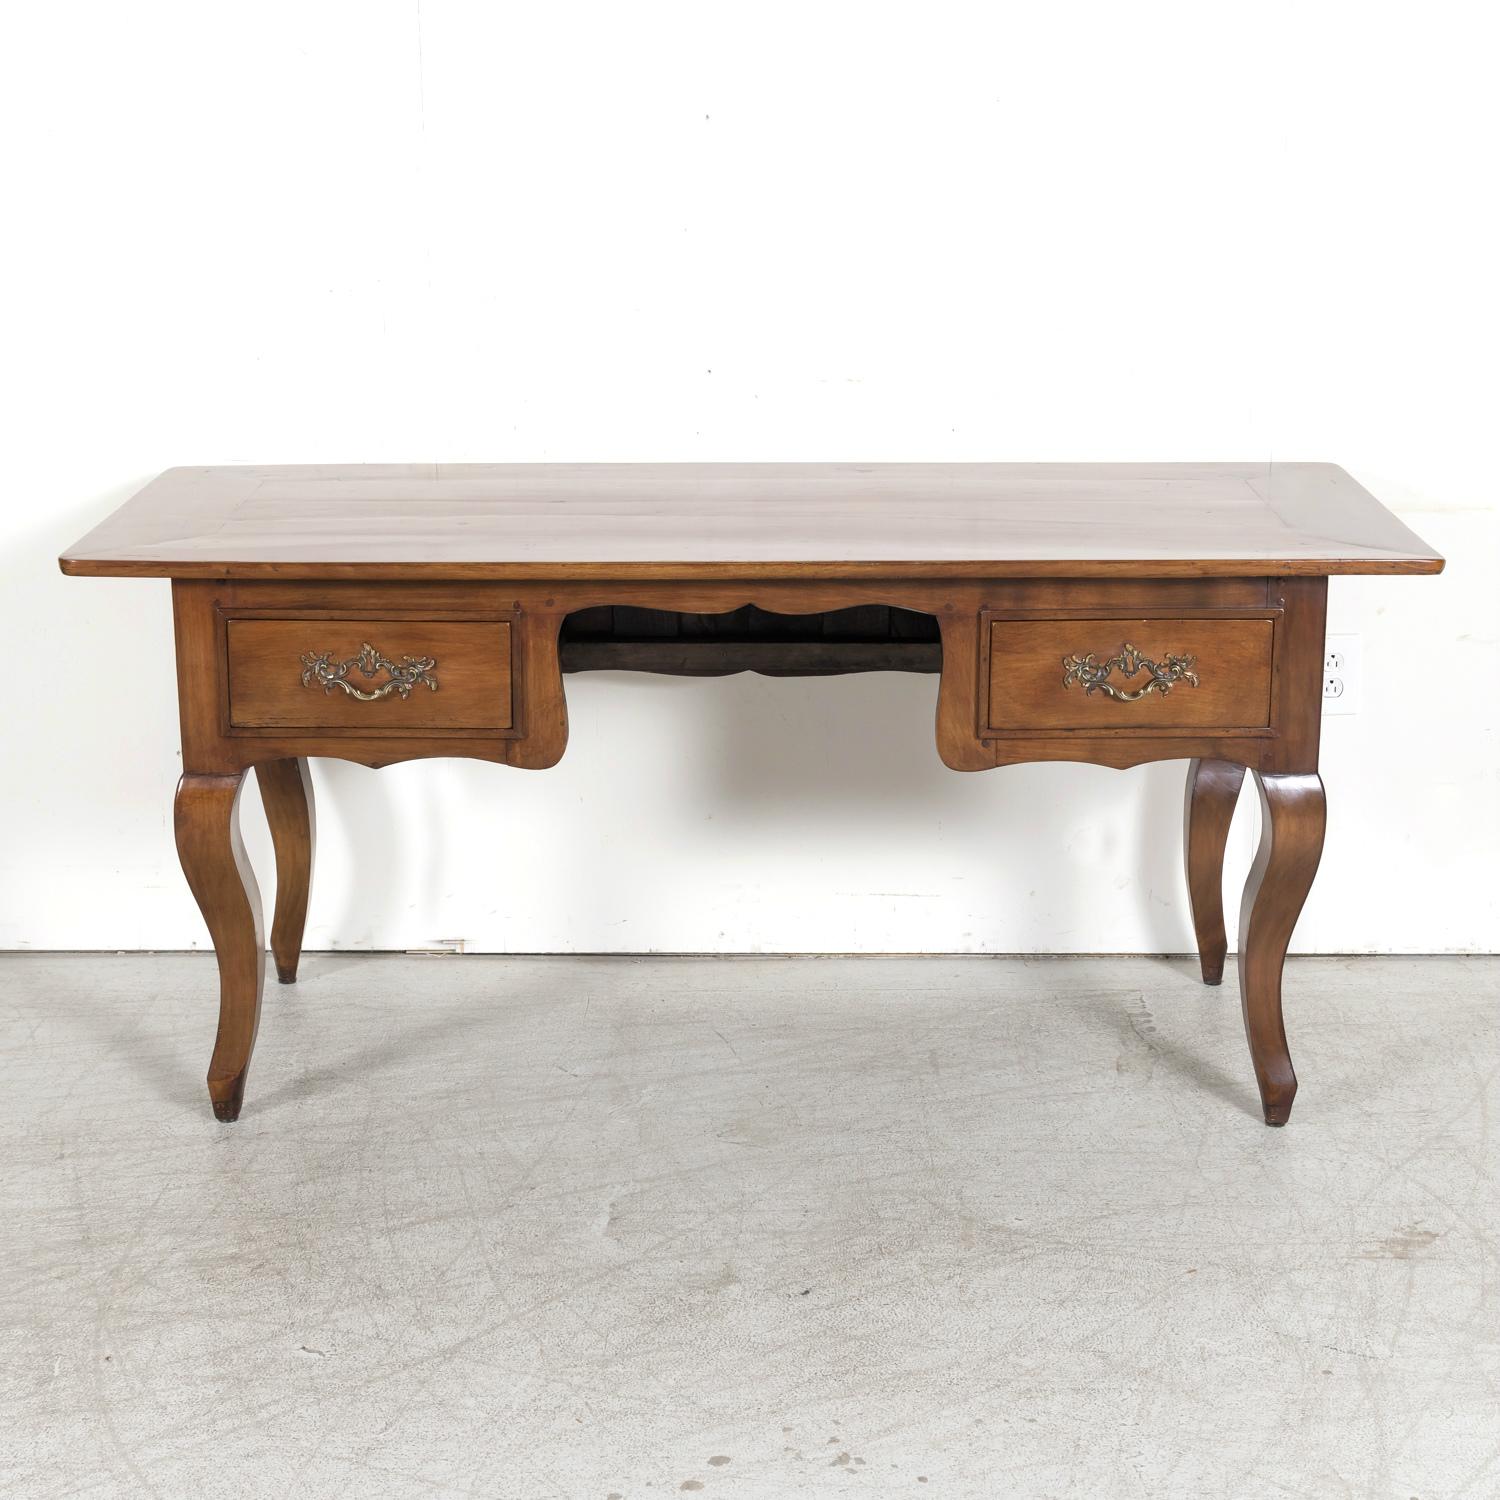 A 19th century French Provincial Louis XV style bureau plat or writing desk handcrafted of solid cherry wood in Dinan, a beautiful medieval-walled town in the Brittany region, circa 1880s. This handsome desk has an inset rectangular plank top over a